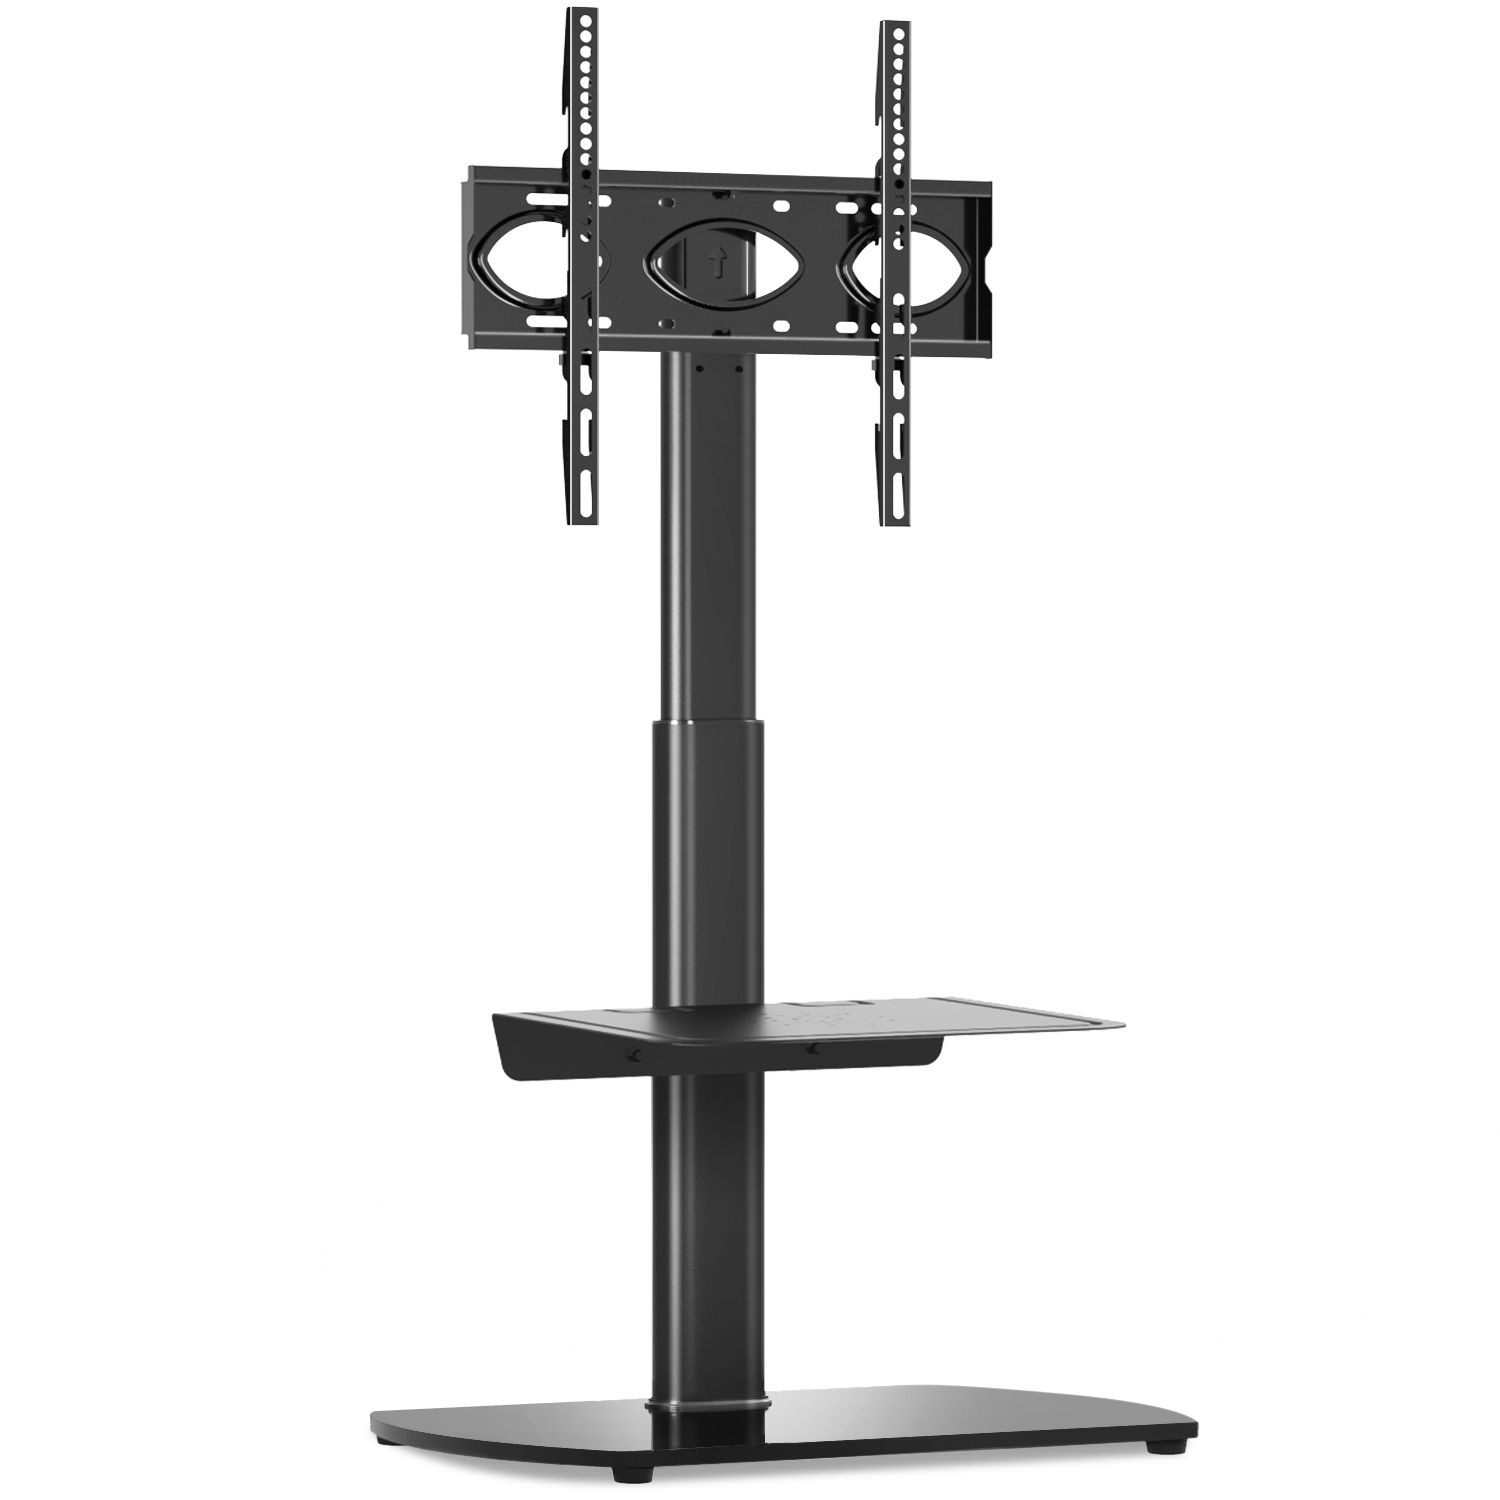 Rfiver Modern Swivel Black Floor Tv Stand For Tvs Up To 55 Throughout Swivel Tv Stands With Mount (View 9 of 15)